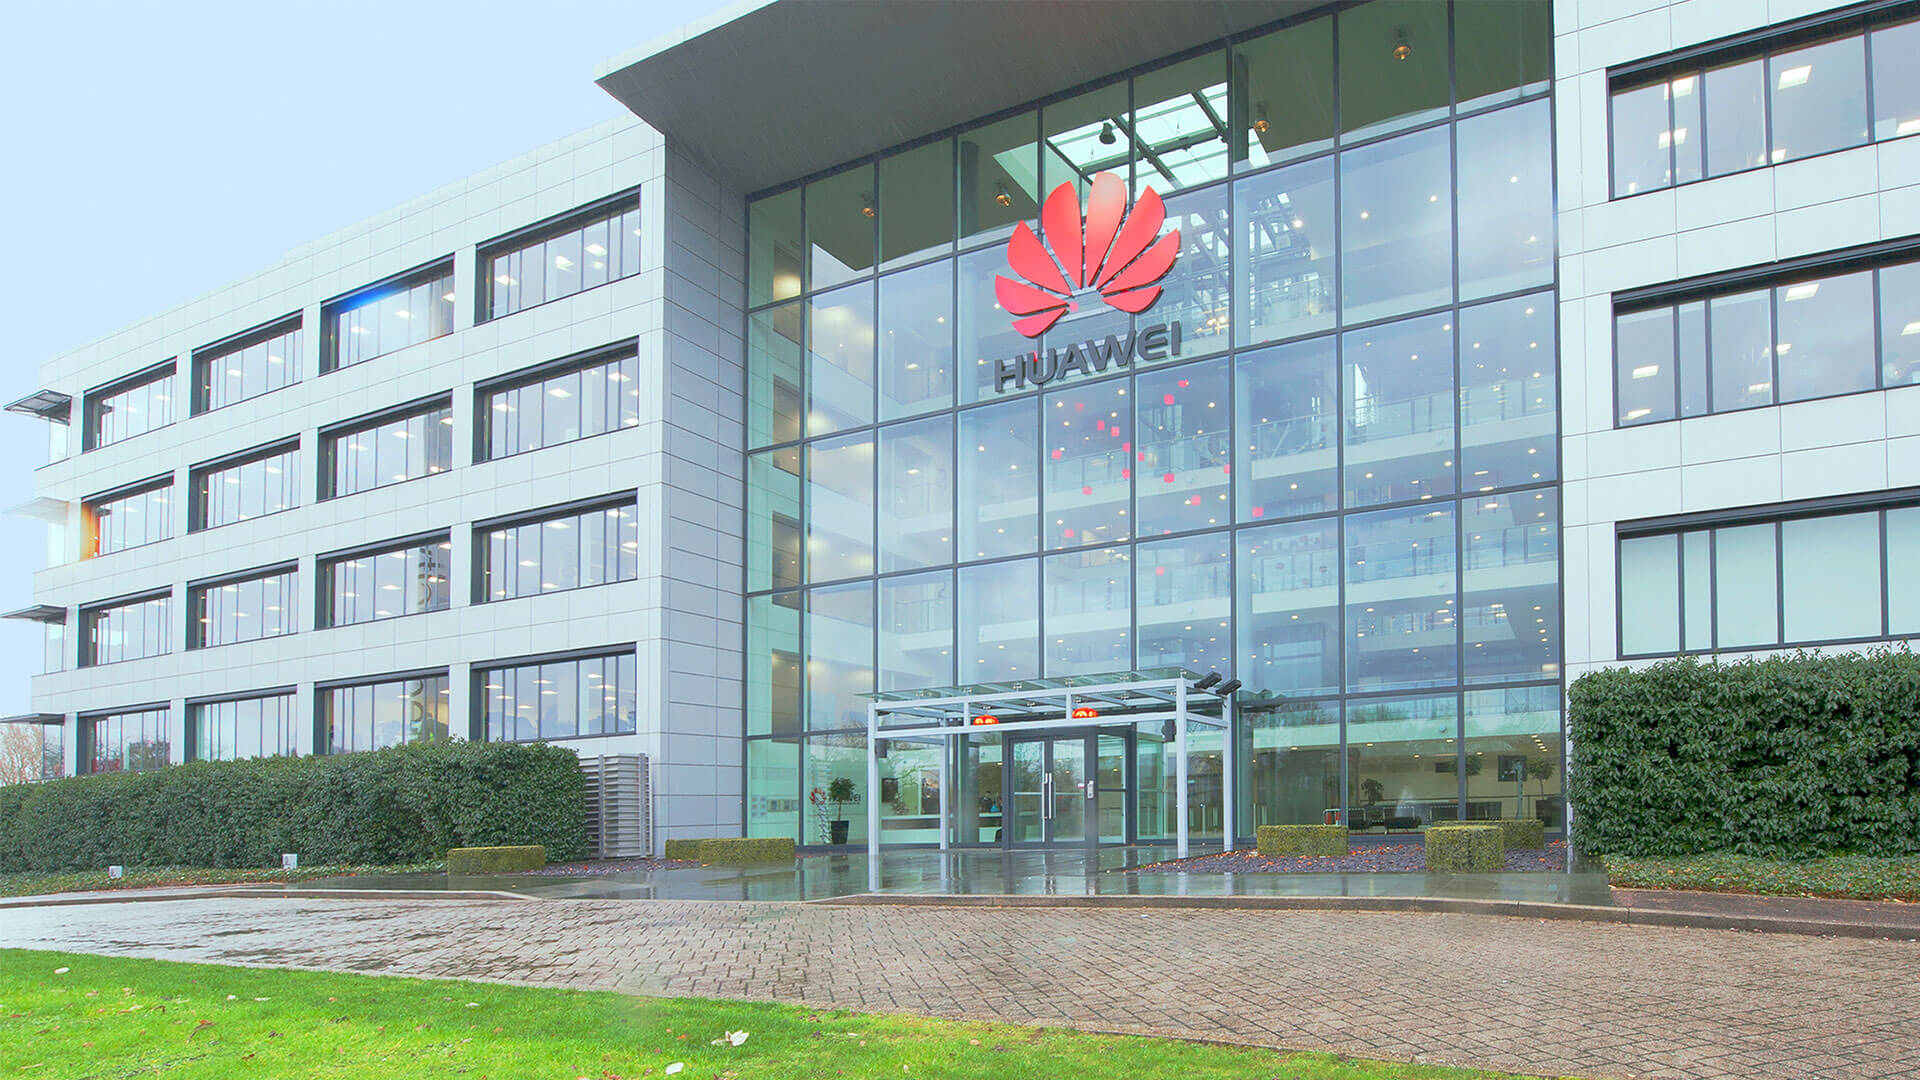 Huawei says Qualcomm applied for a license to sell its chips and the Chinese giant will use them if allowed